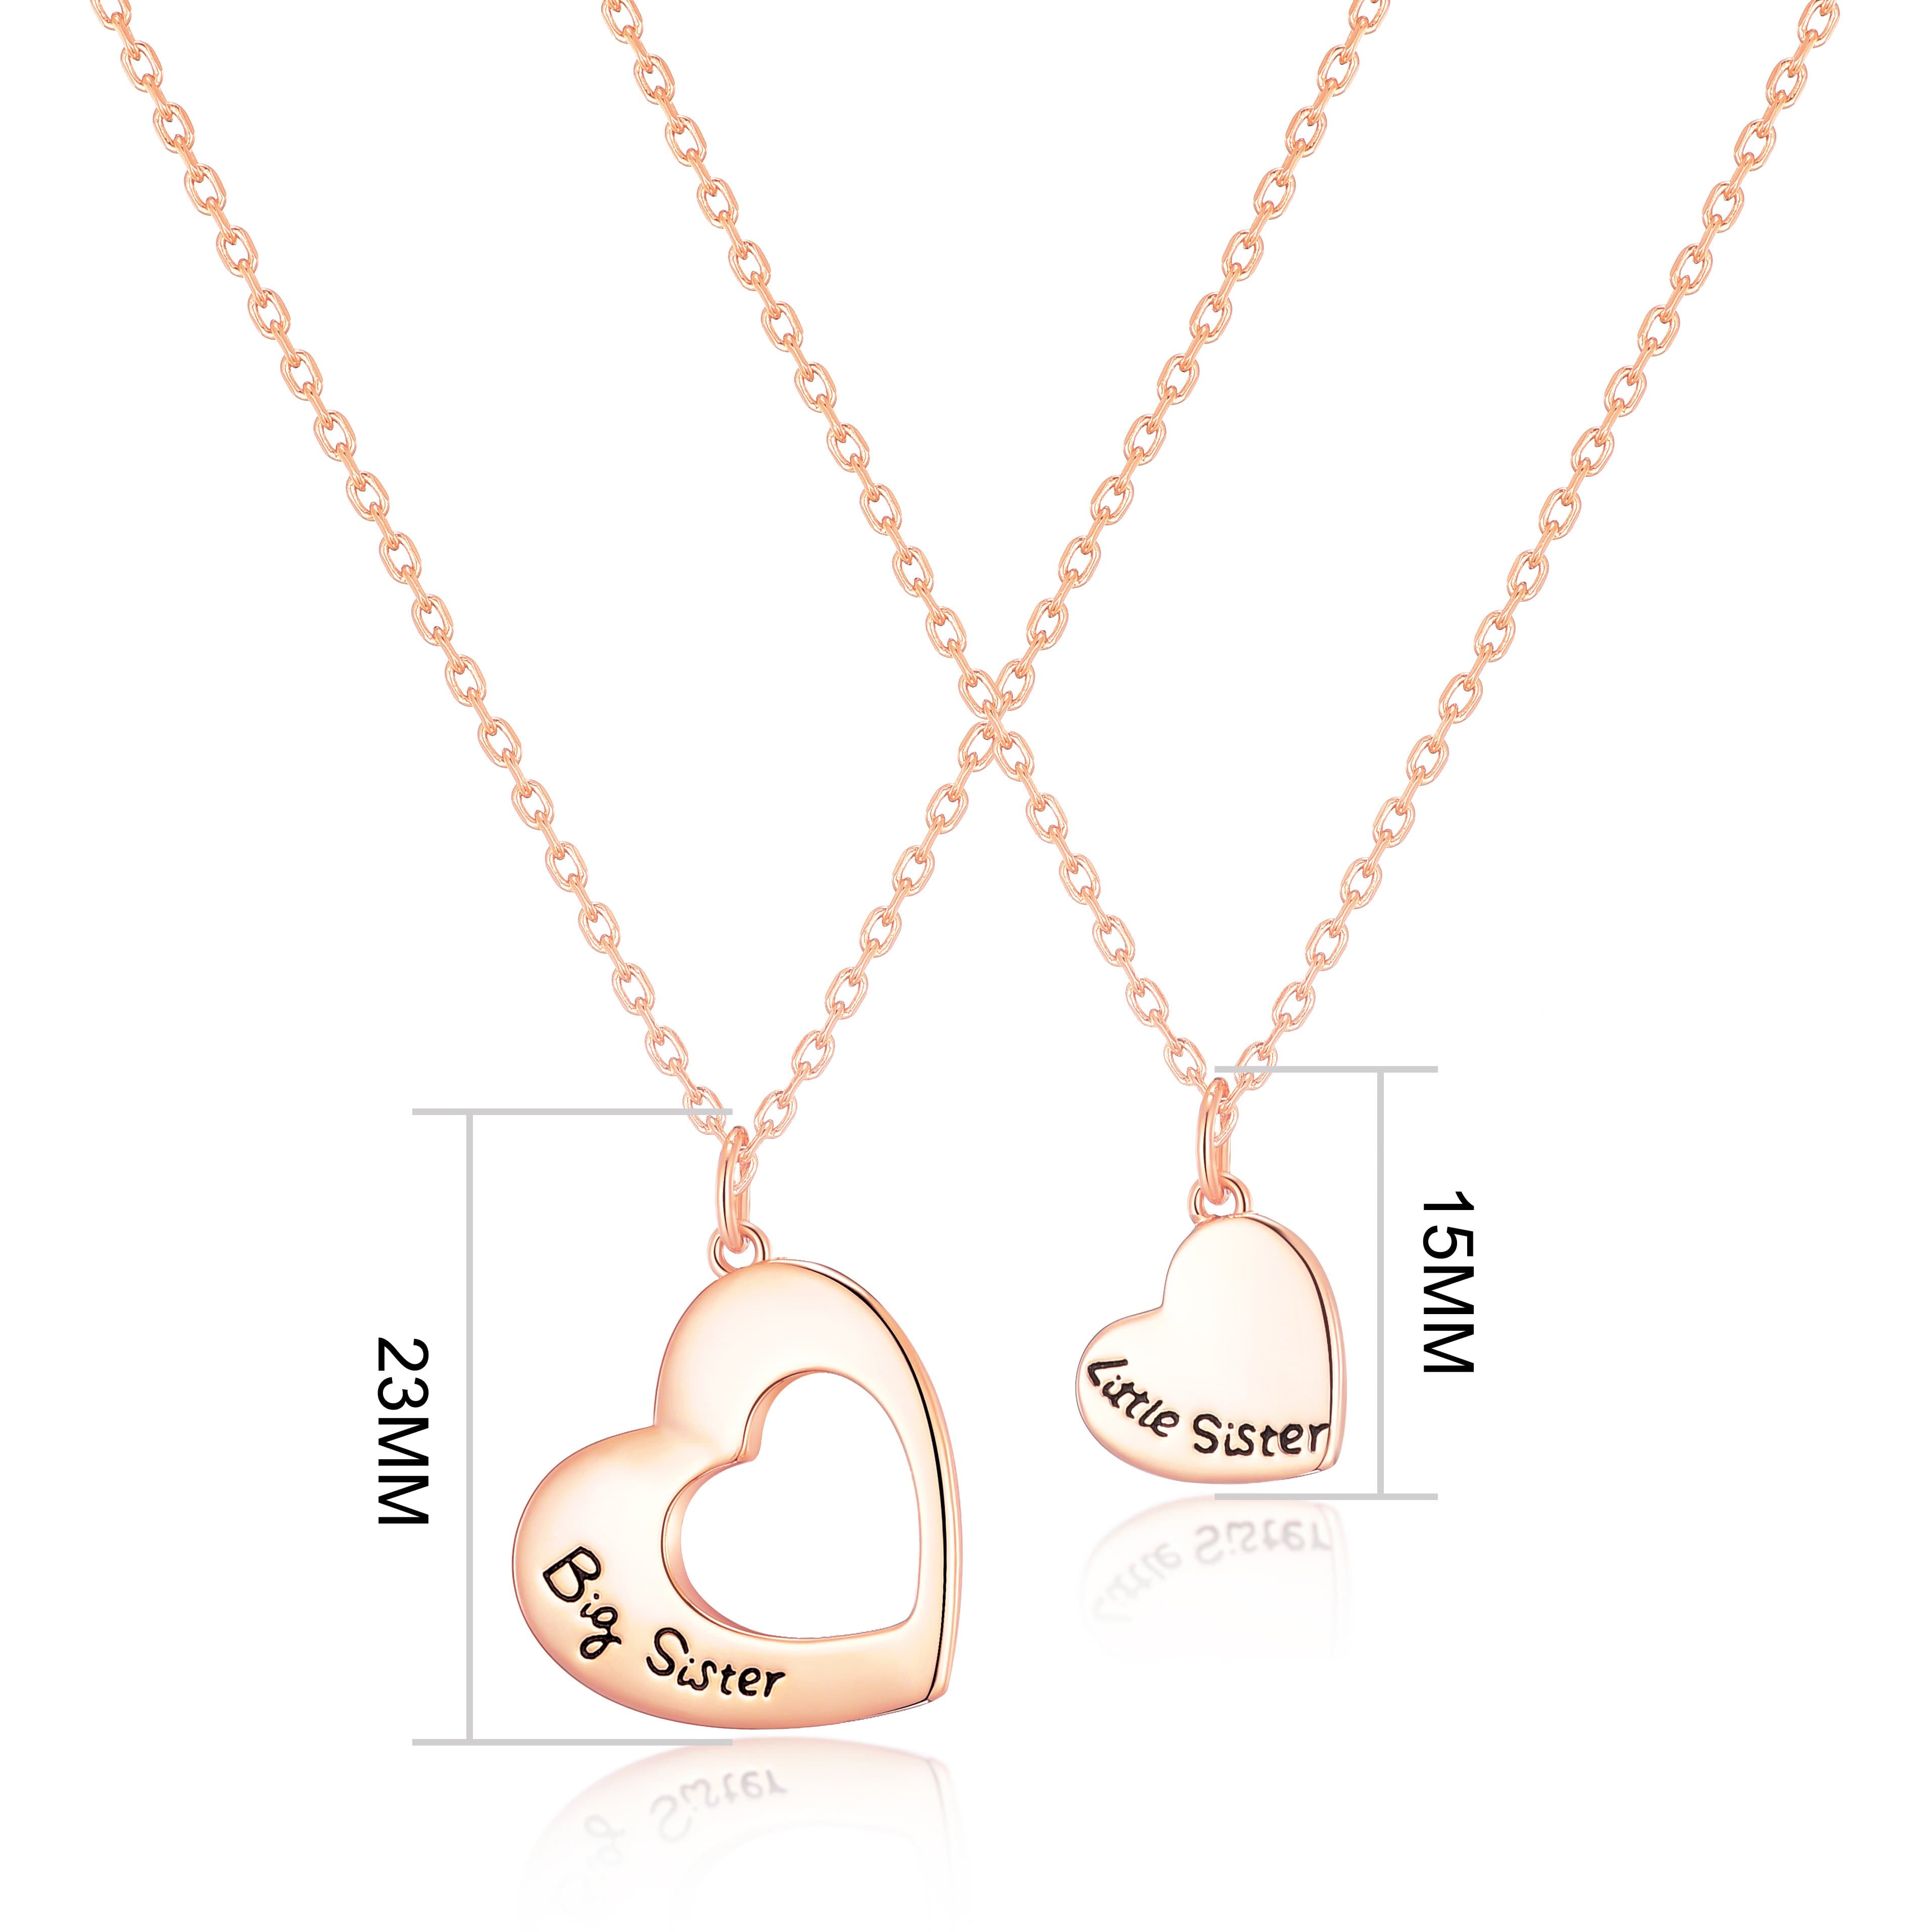 Rose Gold Plated Big Sister and Little Sister Necklace Set